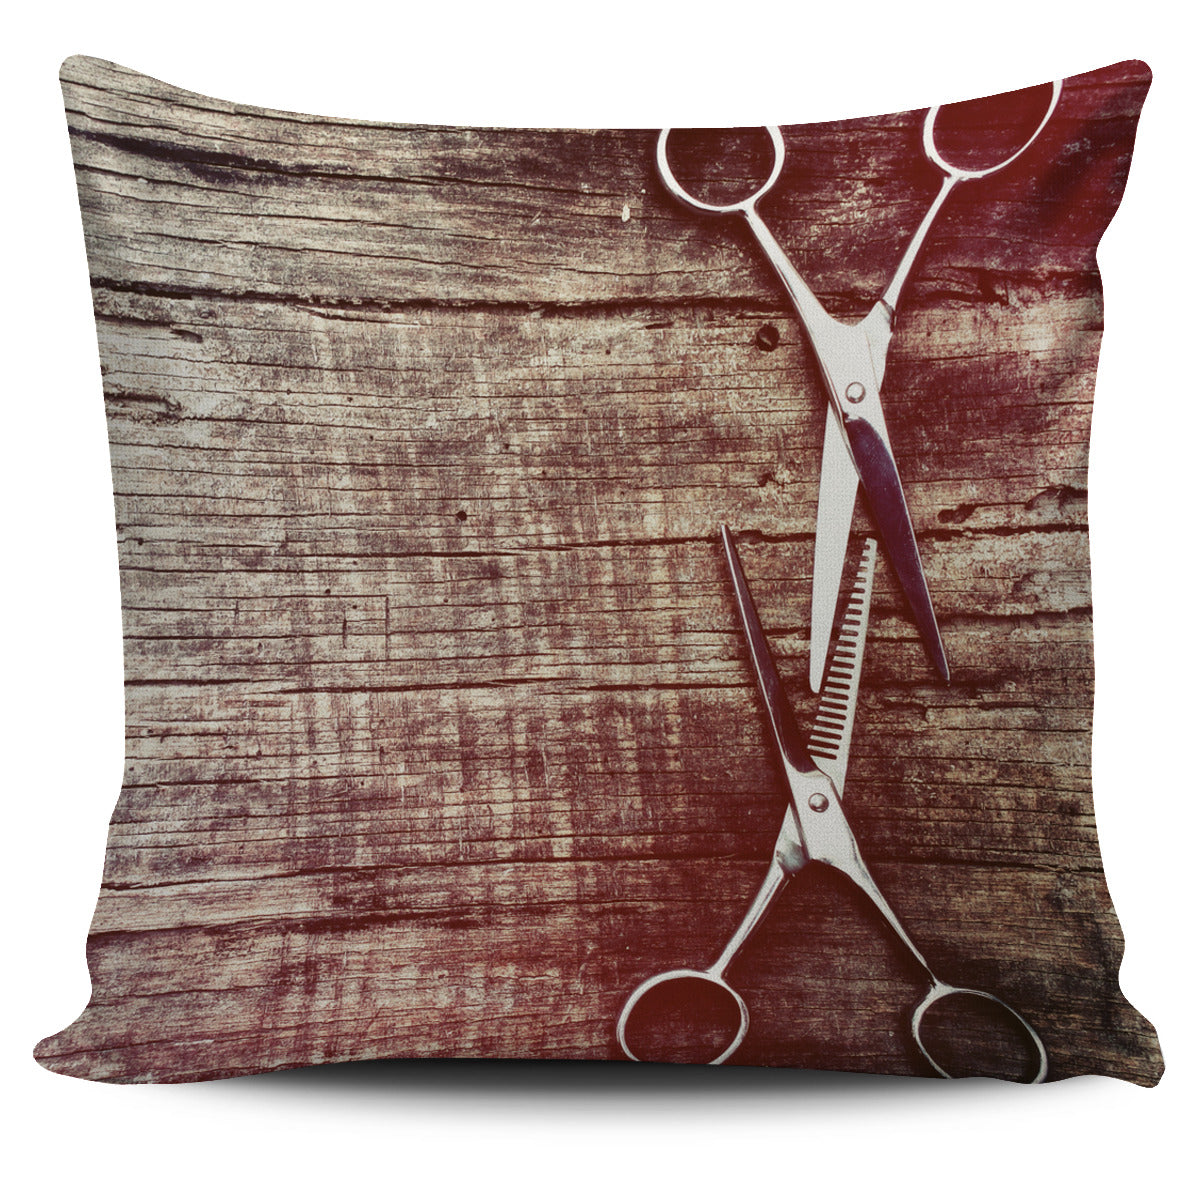 Rustic Shears Pillow Cover